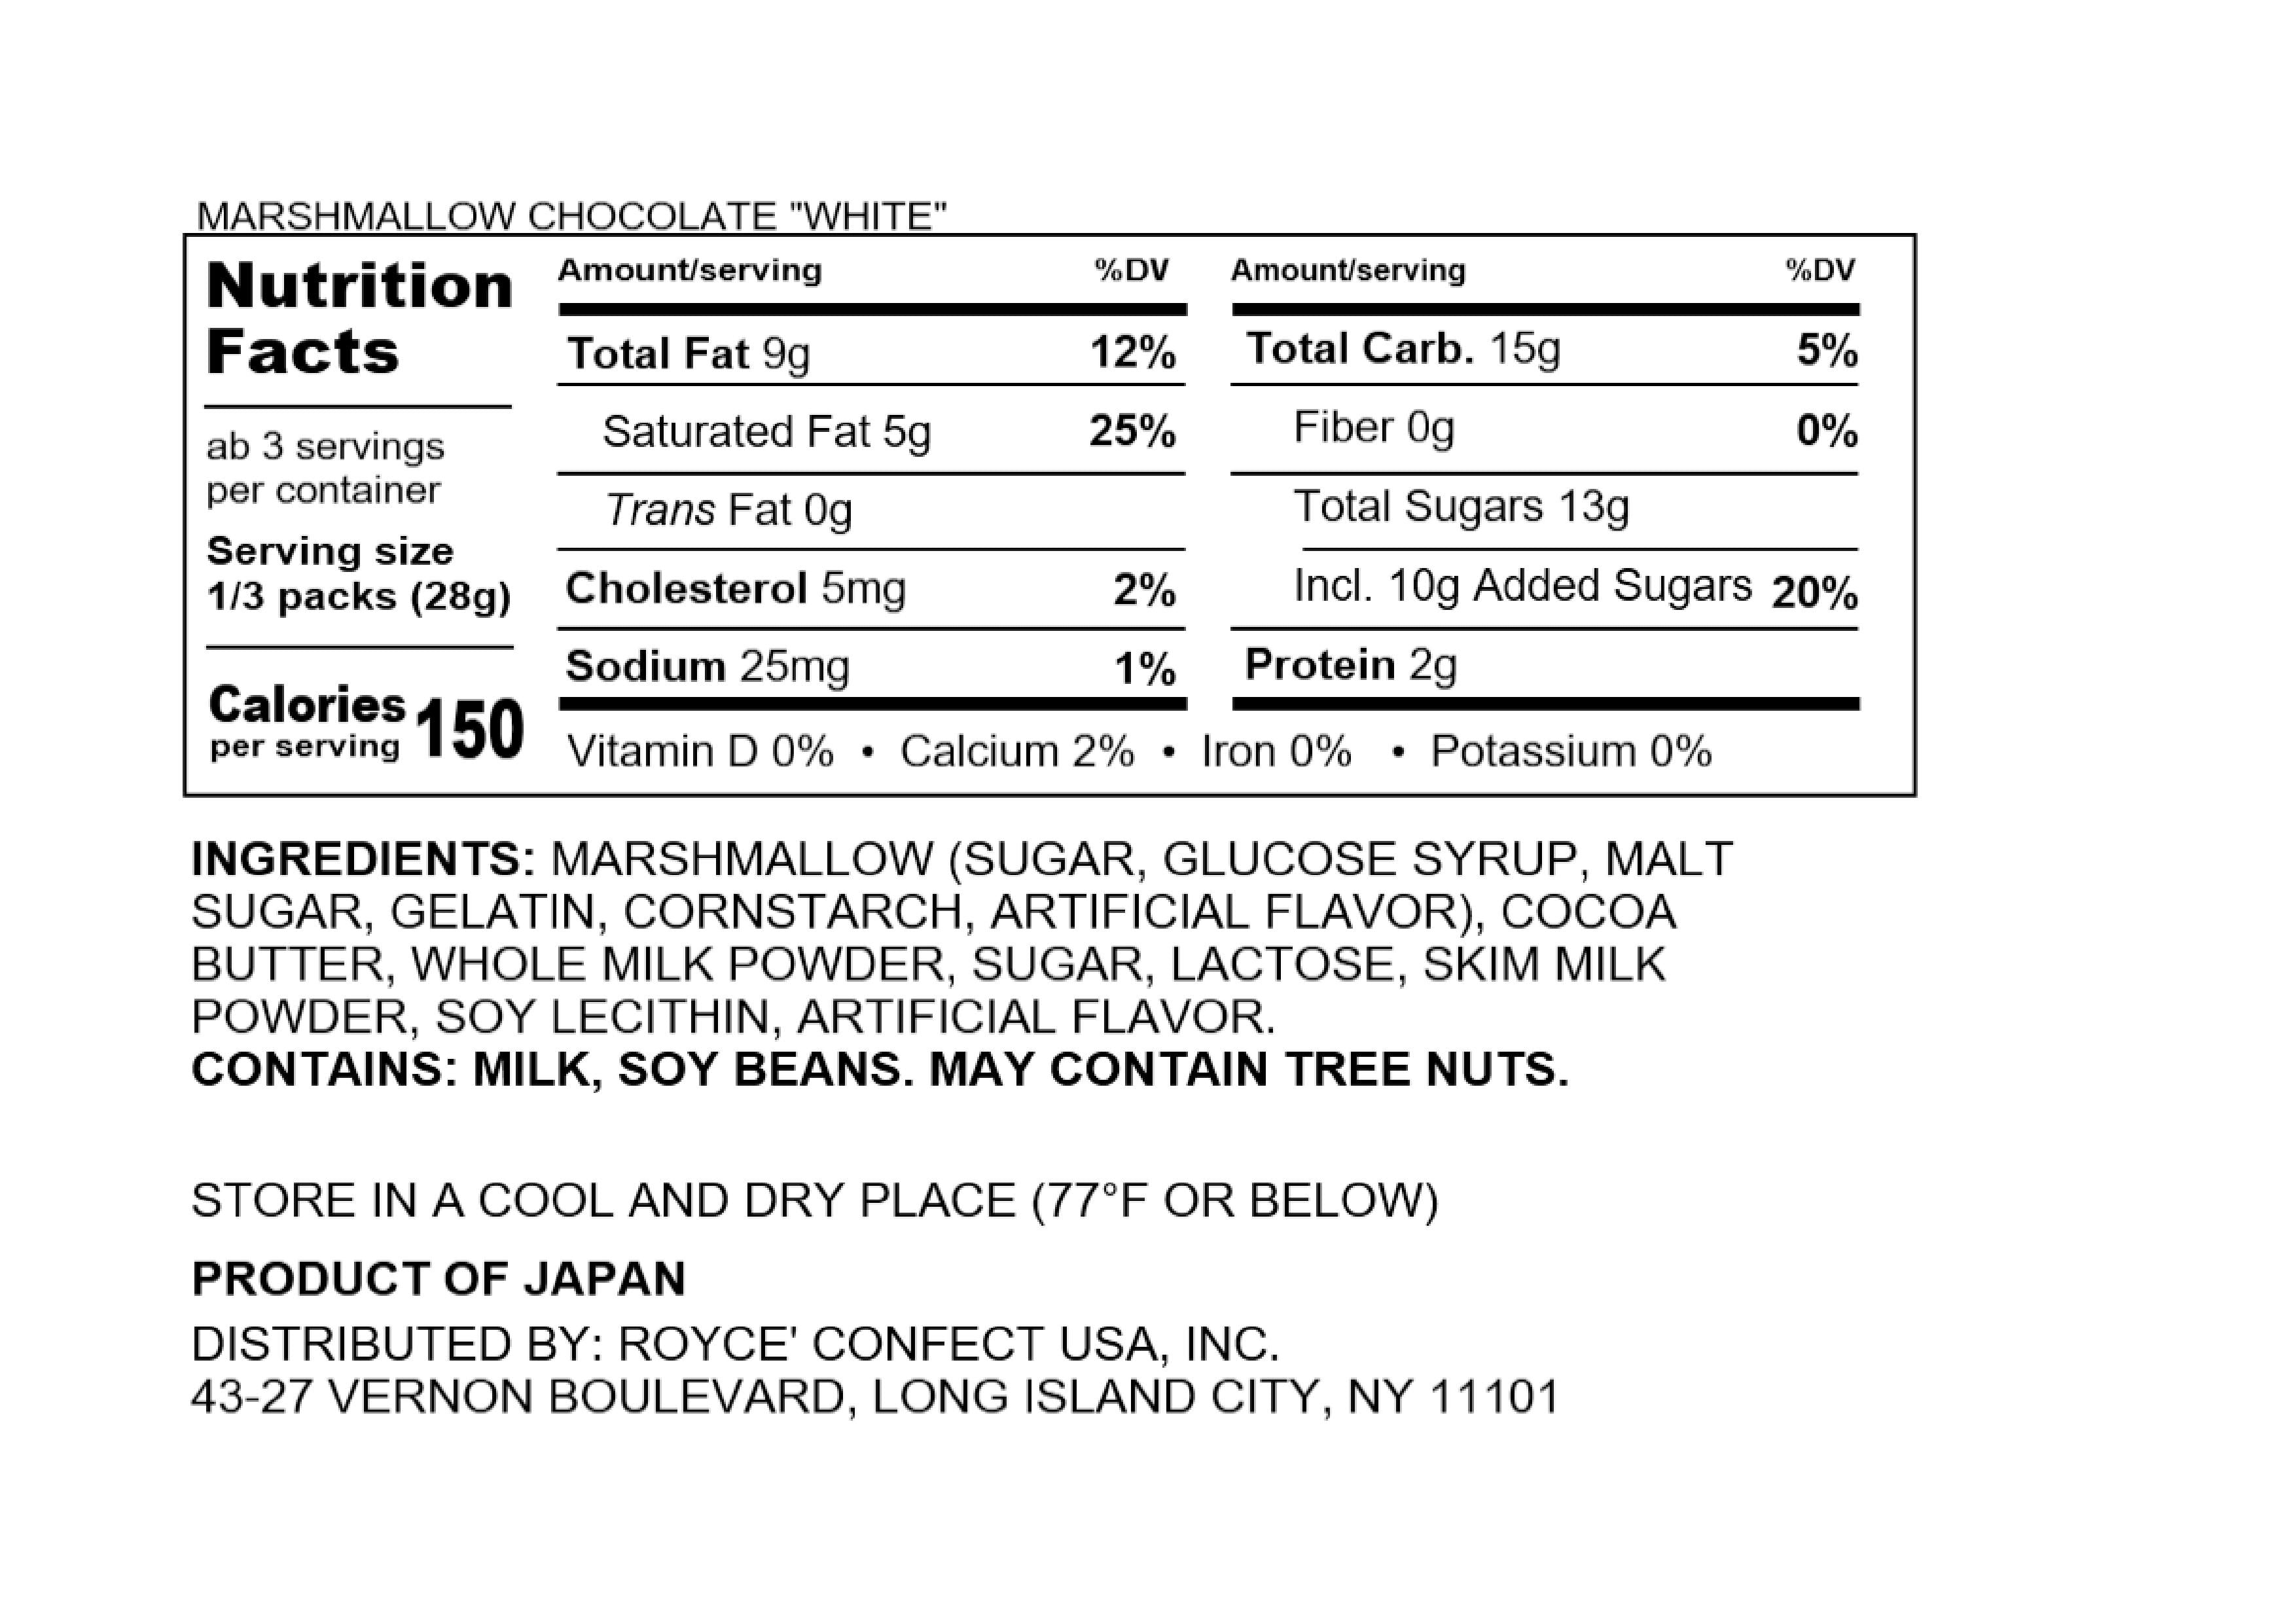 ROYCE' Chocolate - Marshmallow Chocolate "White" - Nutrition Facts